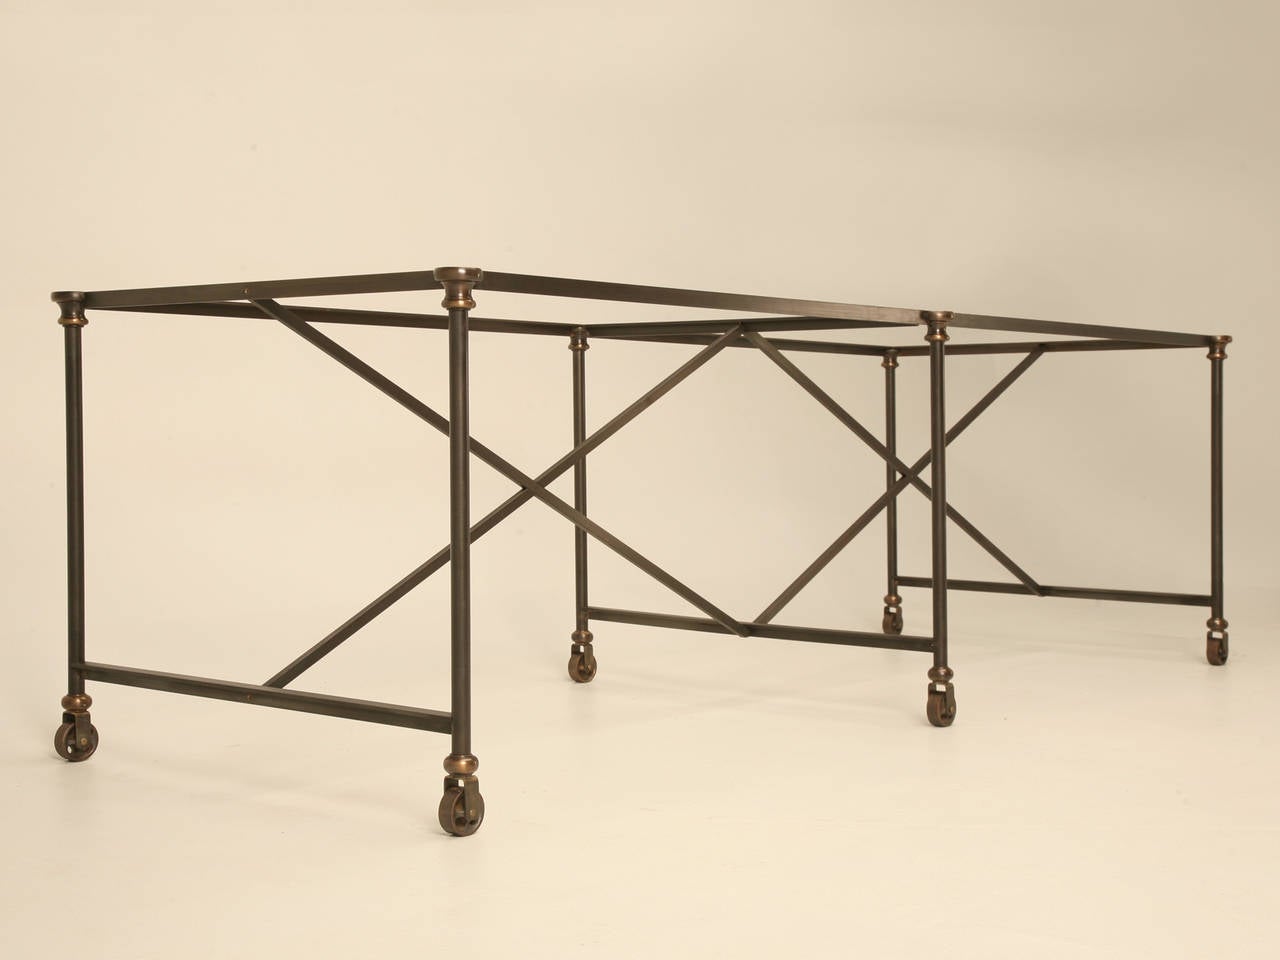 What you are looking at is the skeleton frame work for a French Industrial Style circa 1900 Made into a Modern Kitchen Island that we manufacture and offer in any size imaginable. Generally there is a stone slab, butcher block or just a beautiful